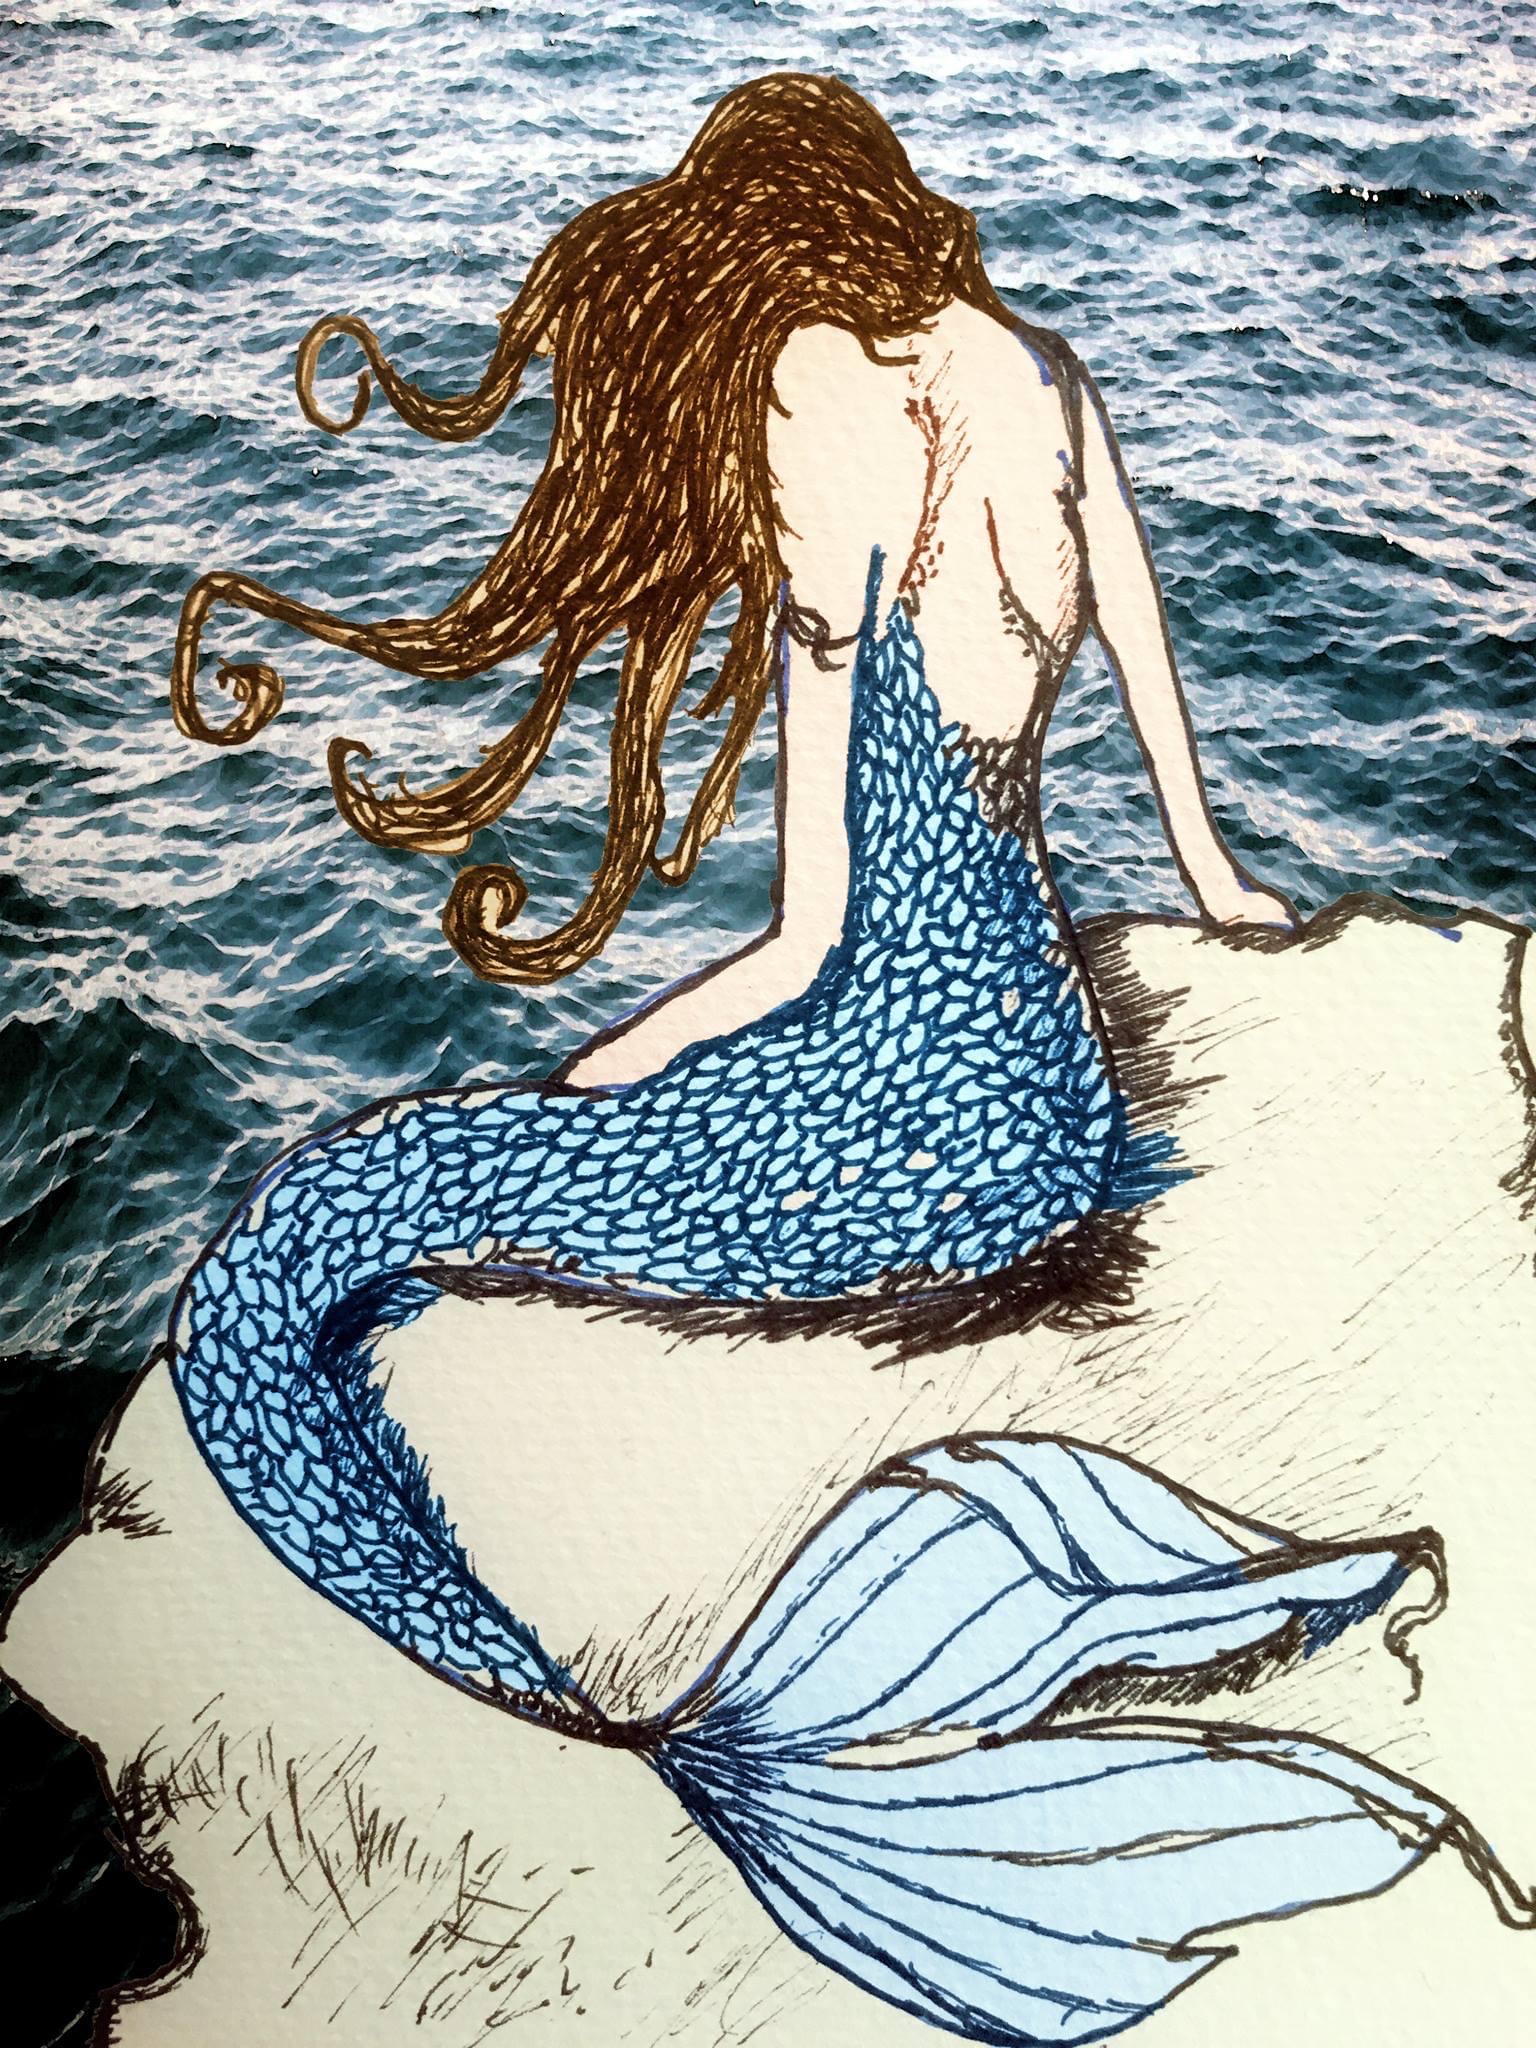 Mermaid on a Rock Composite